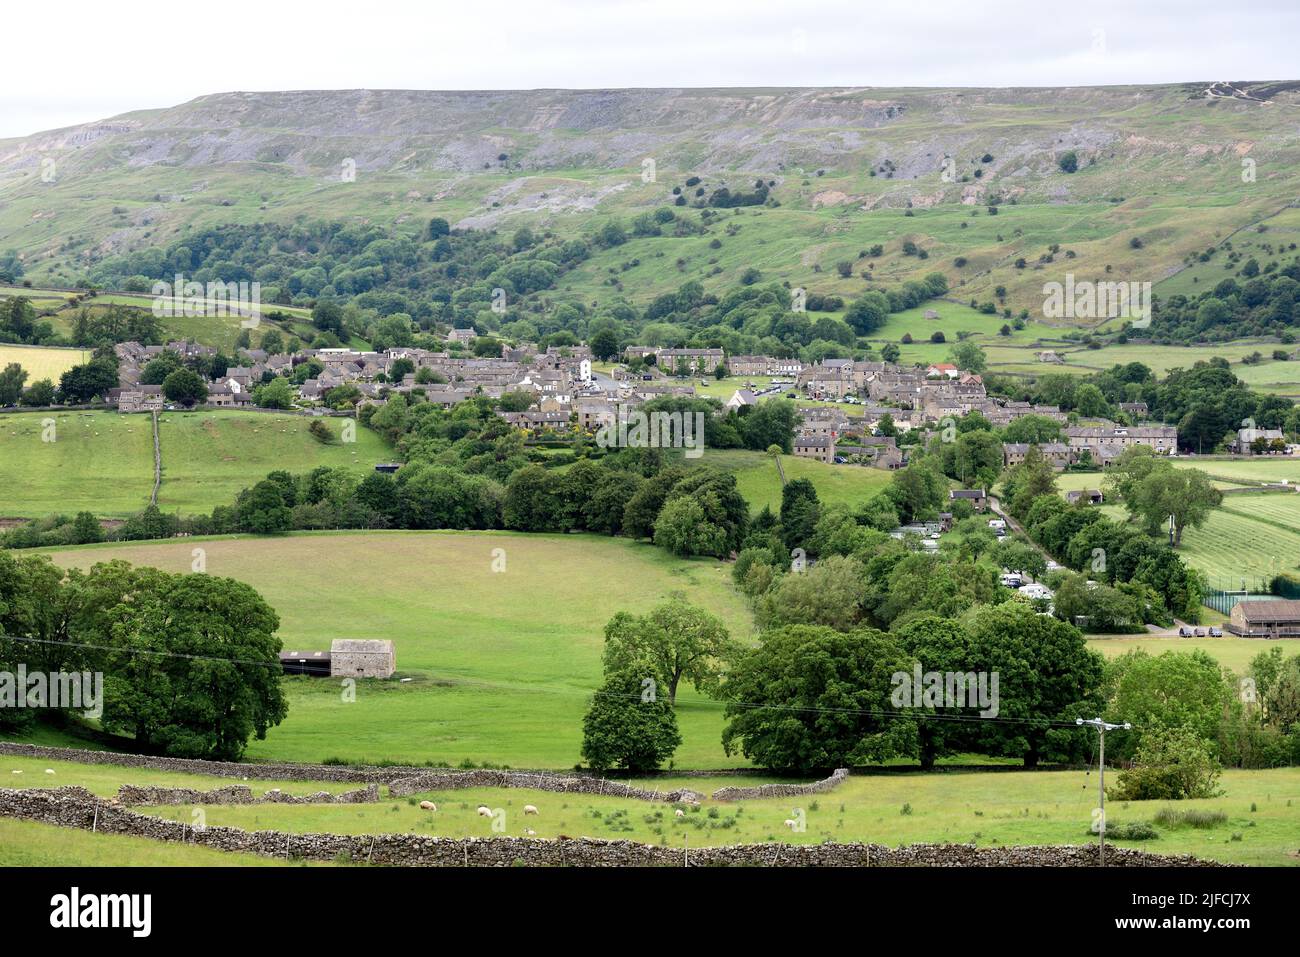 The village of Reeth seen from above. Stock Photo